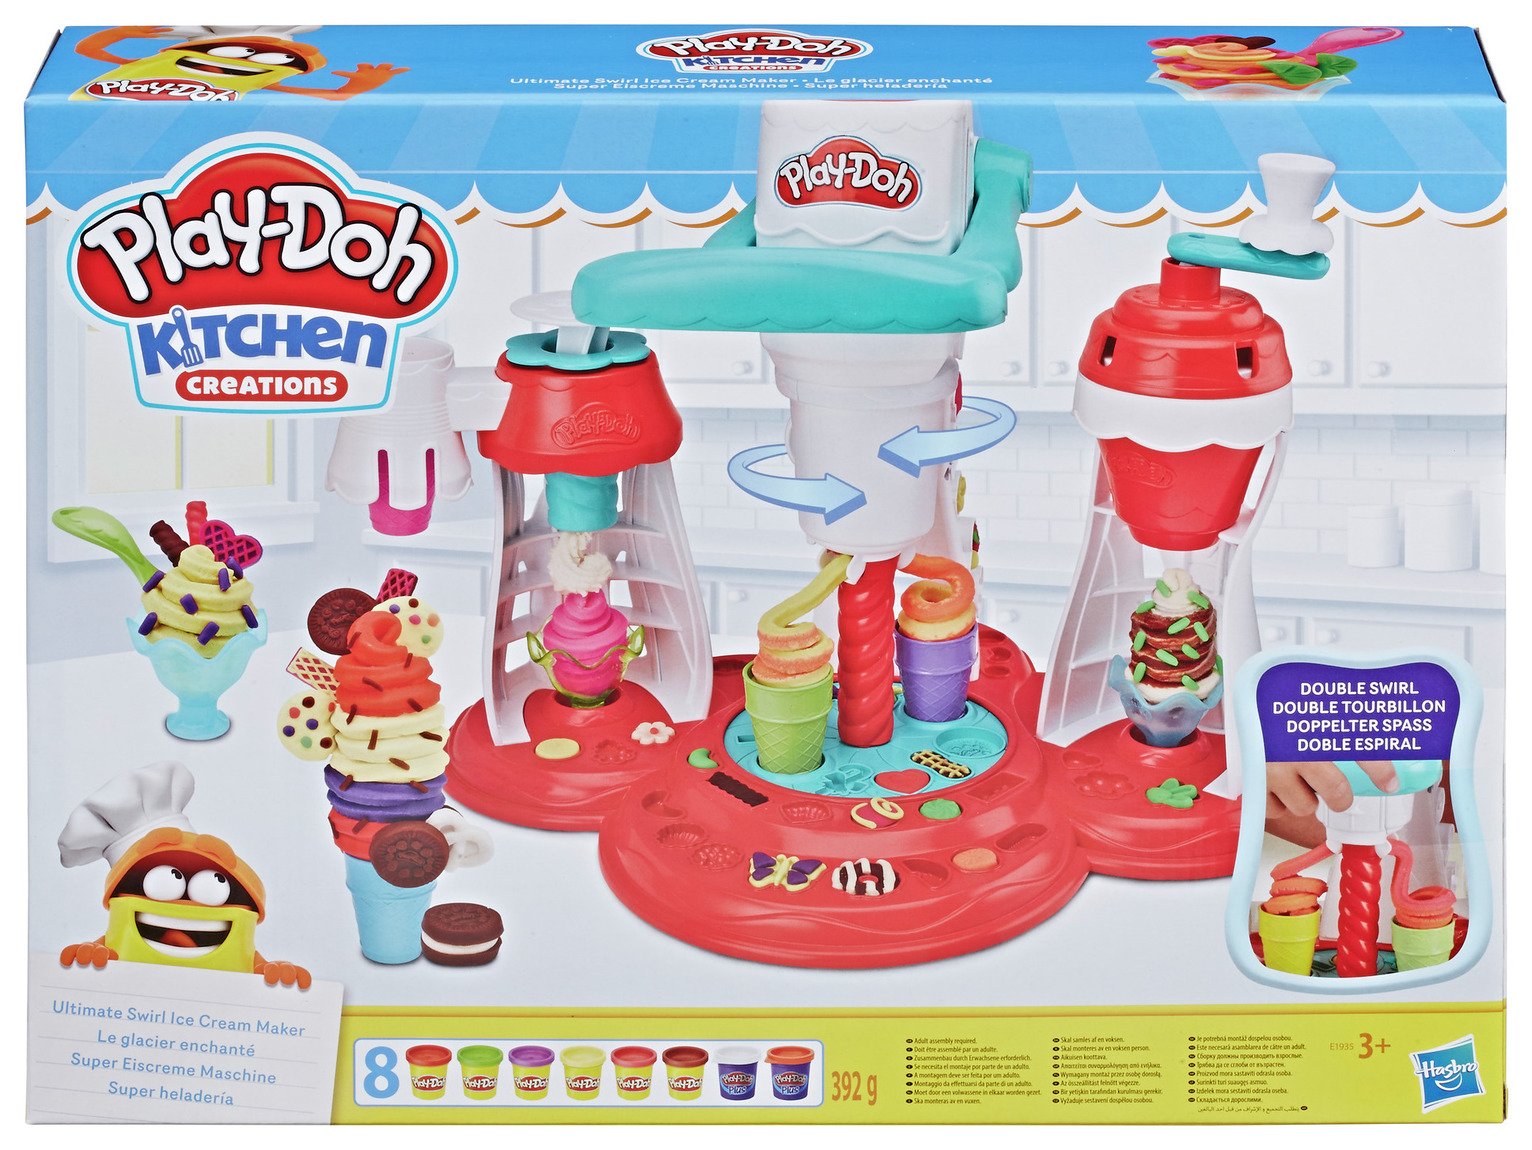 Play-Doh Kitchen Creations Ultimate Swirl Ice Cream Maker Review